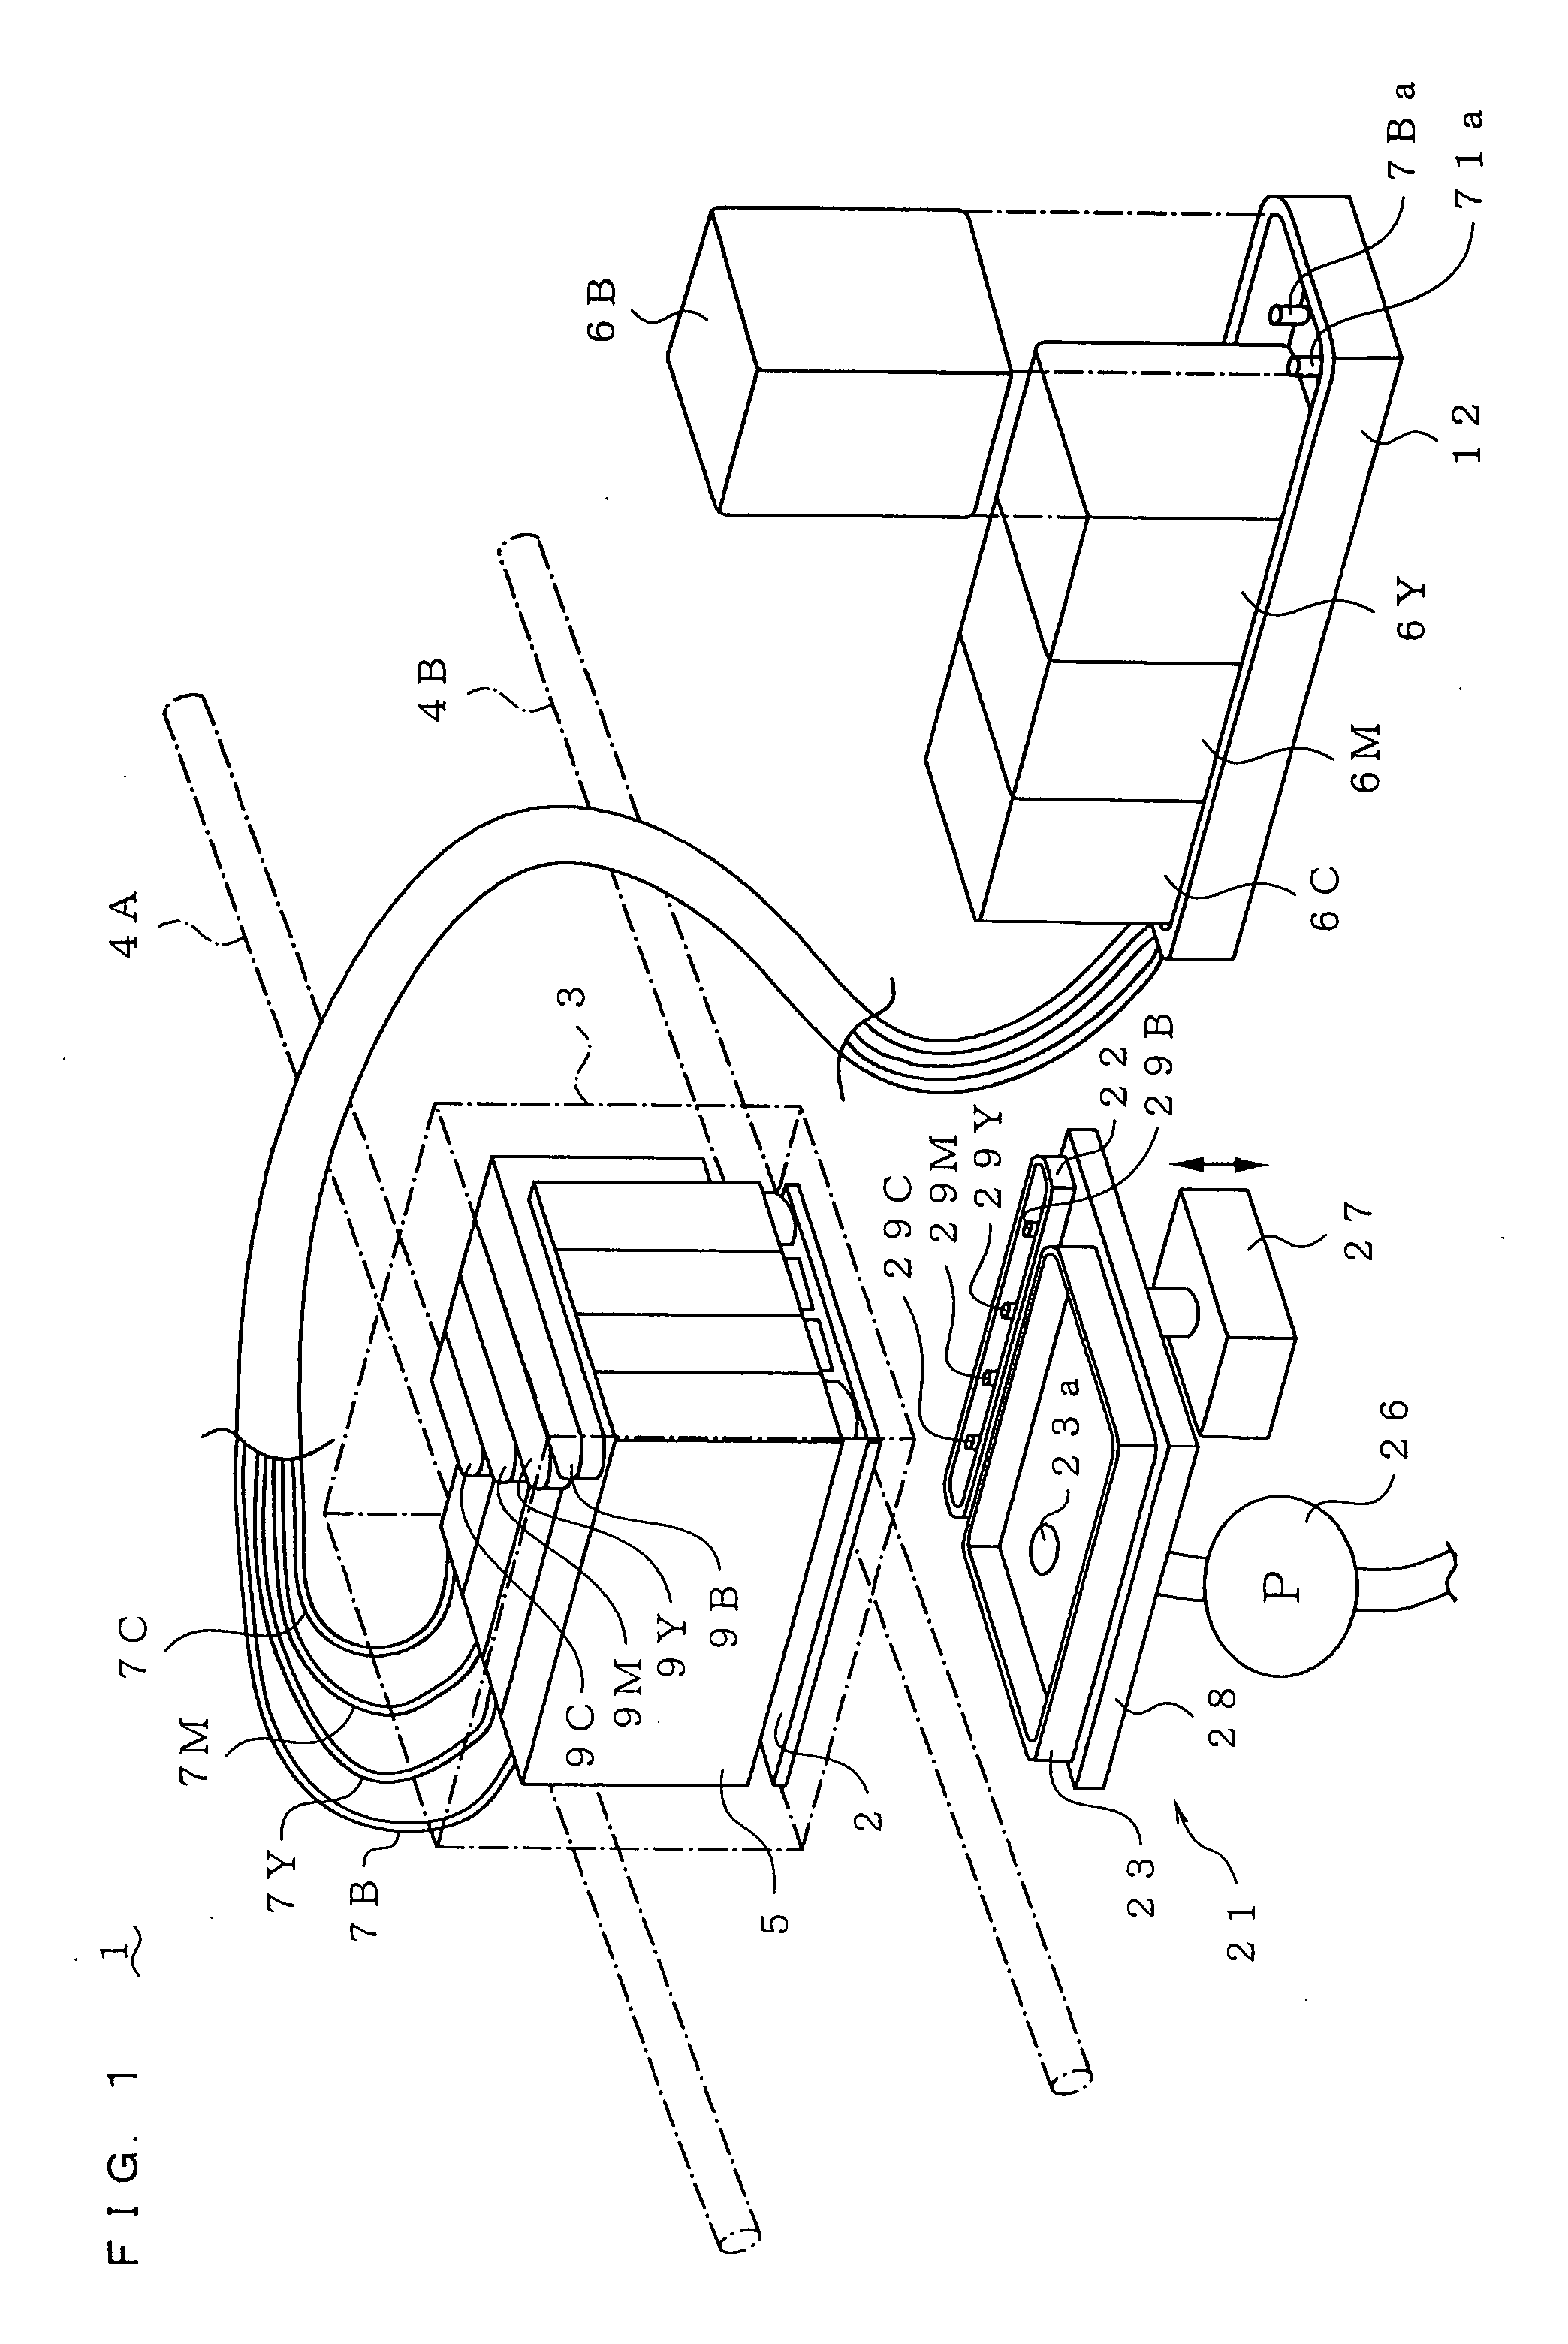 Inkjet recording apparatus and air removal method therefor